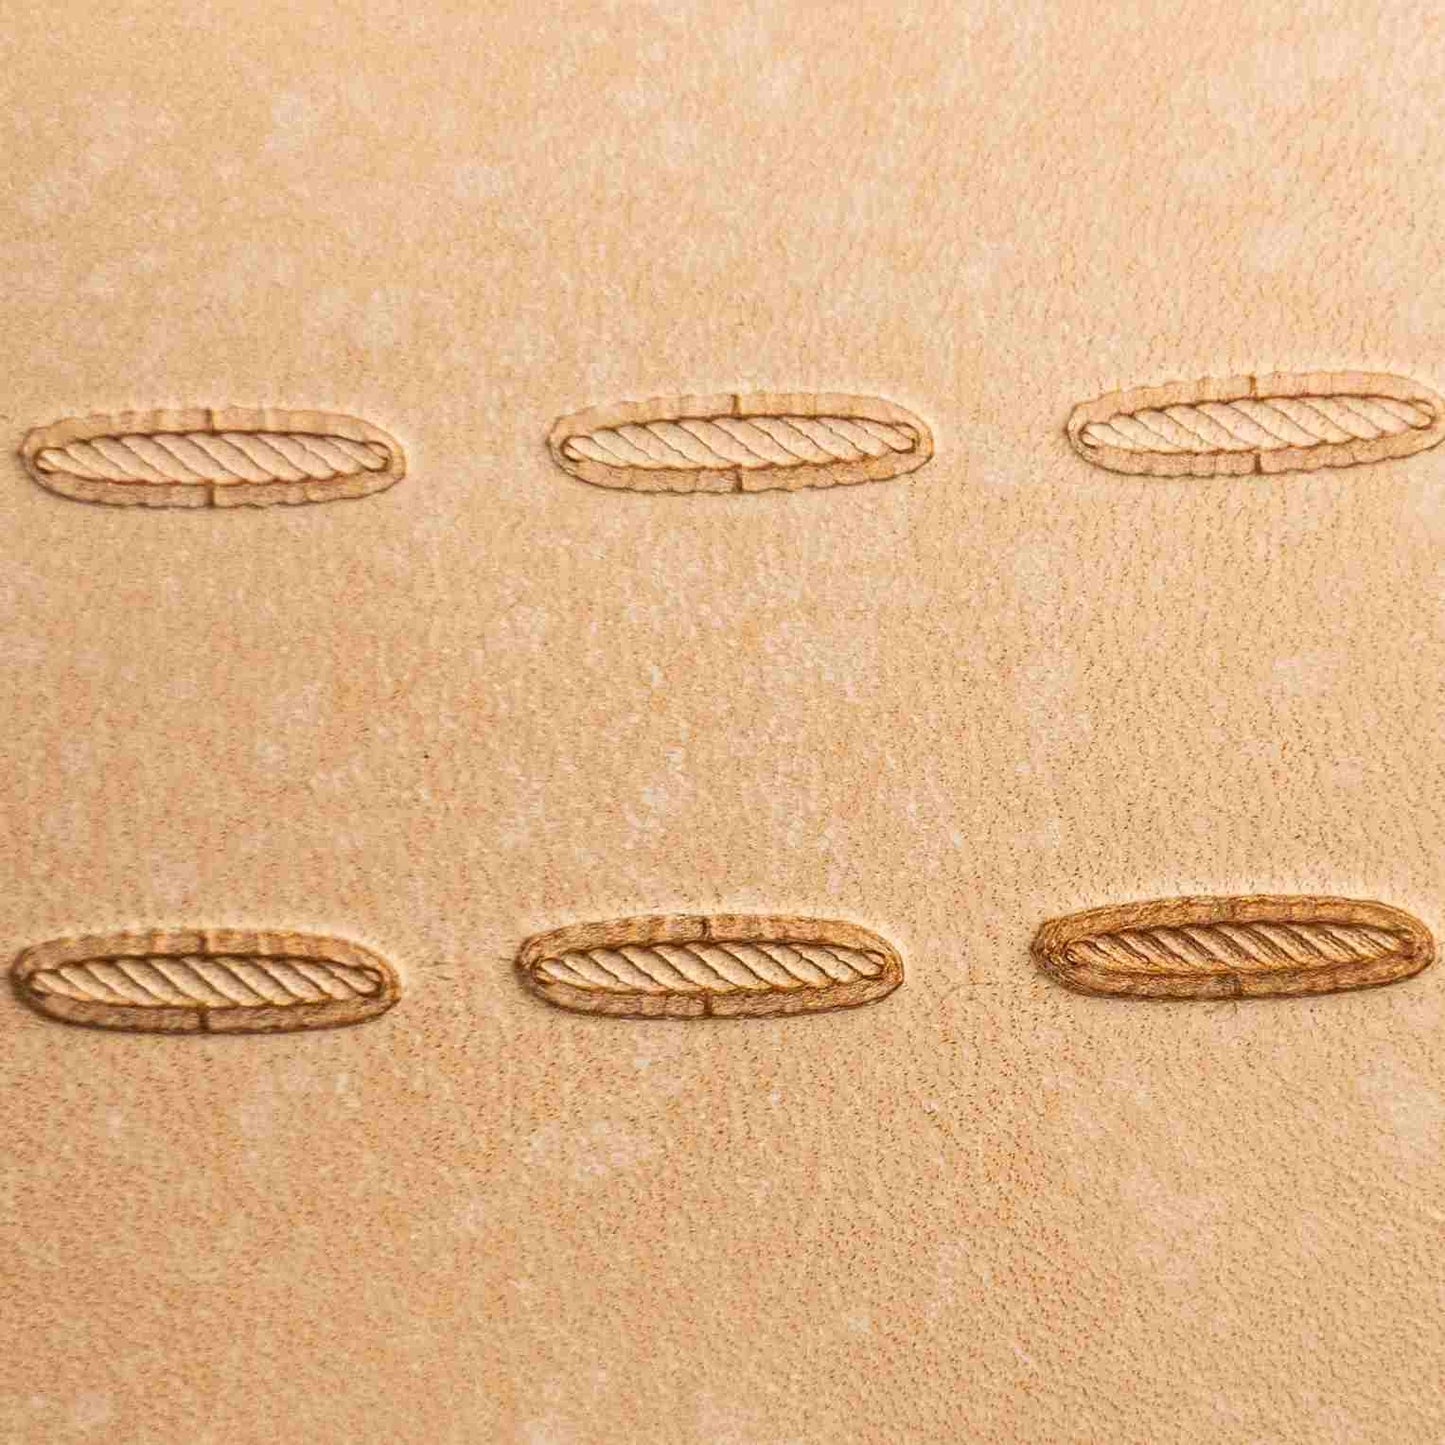 LT095 Premium Leather Stamping Tools for Professional Crafters-15x4mm size